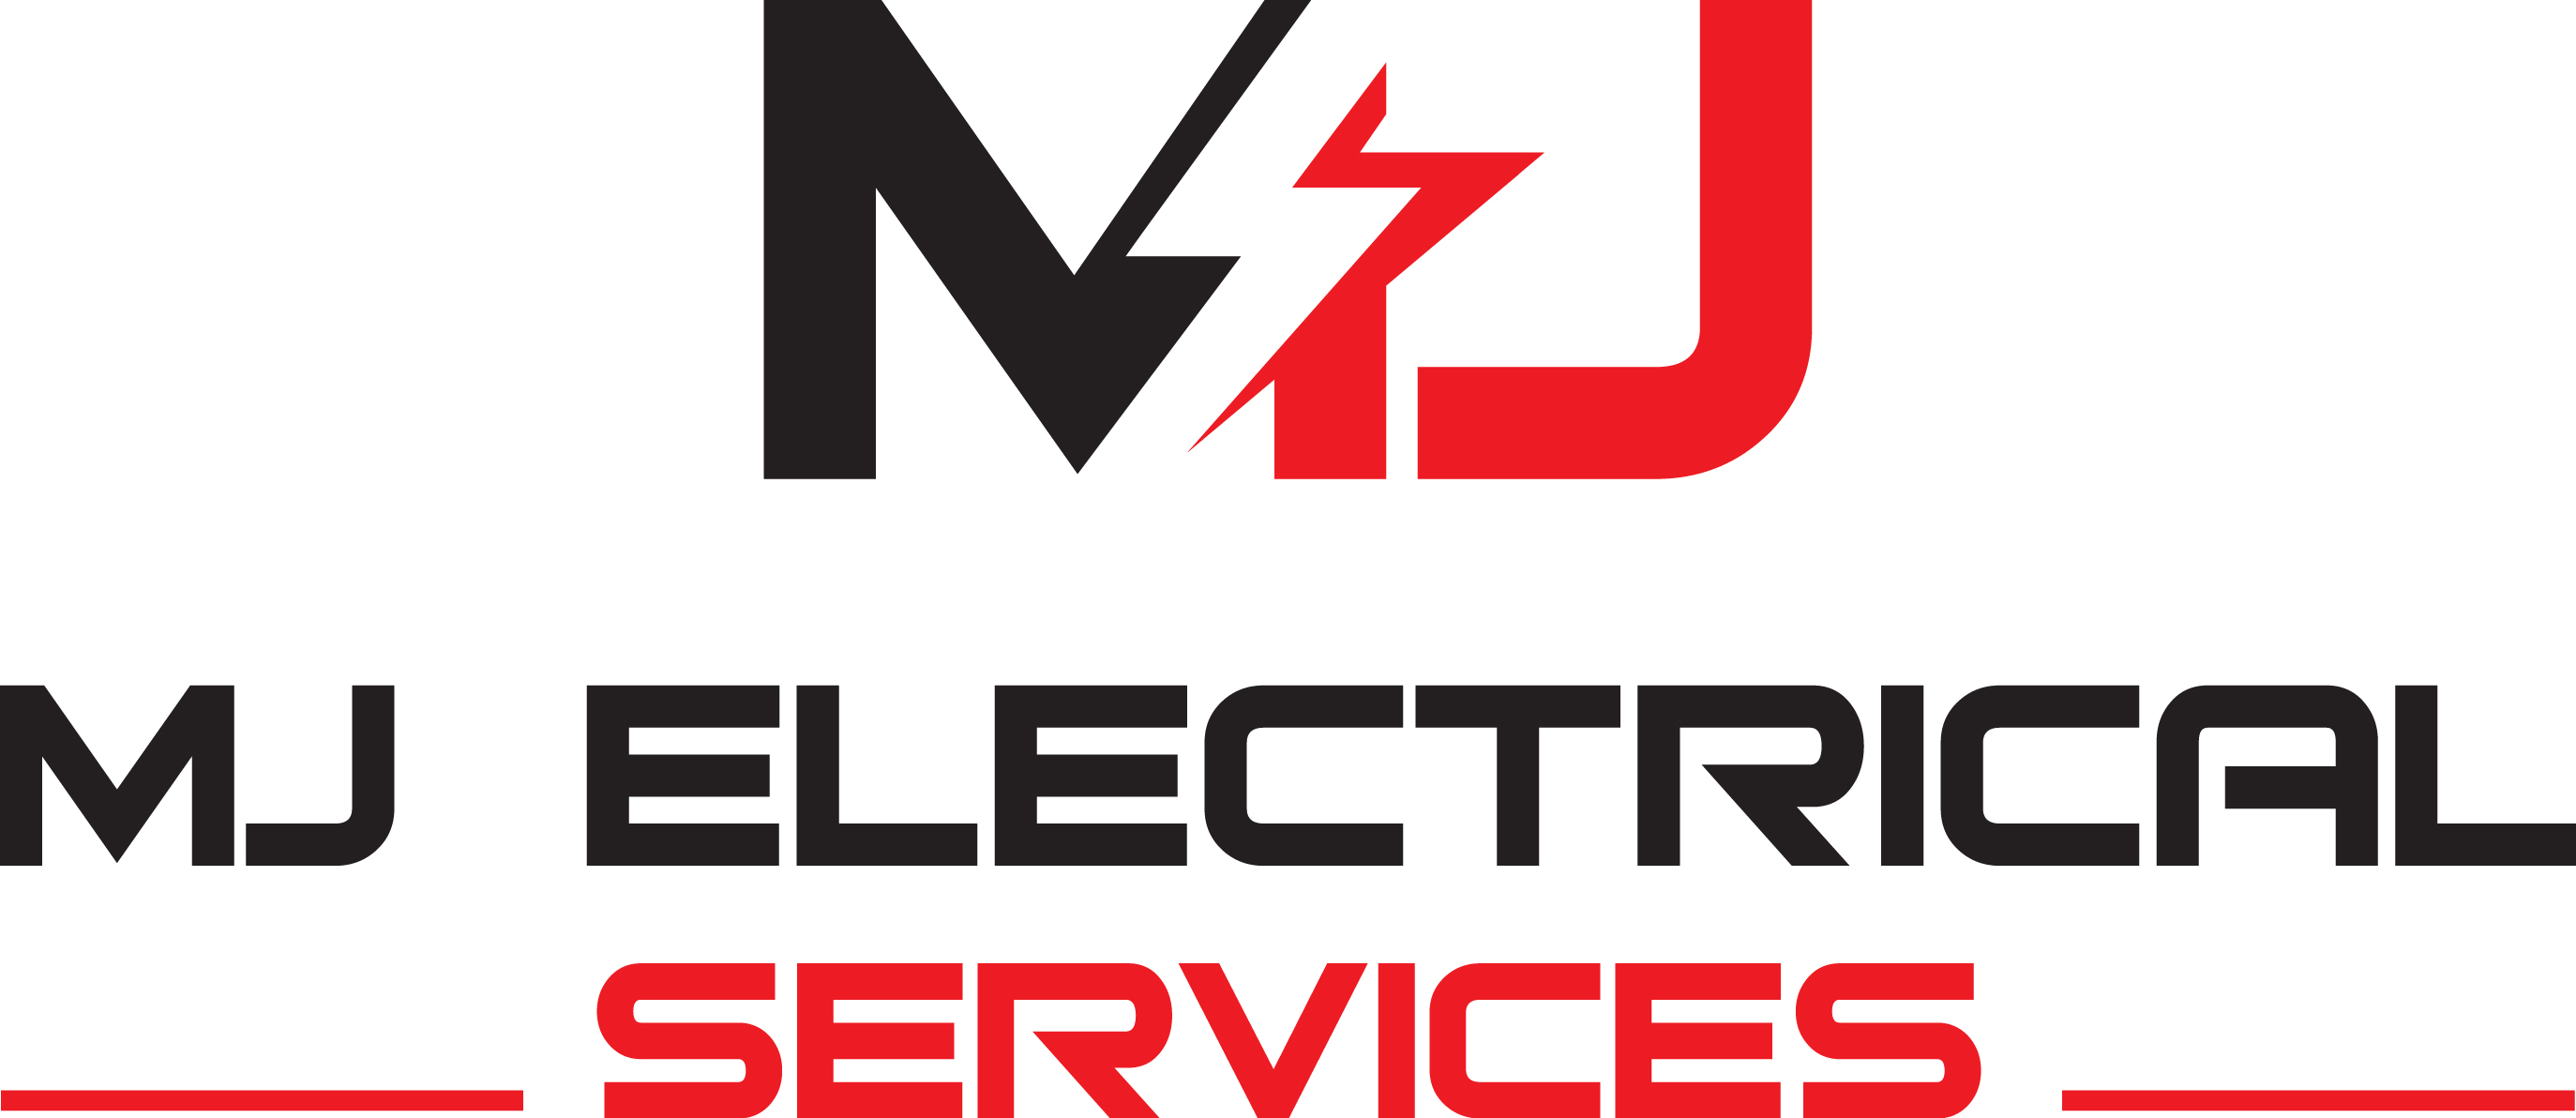 MJ Electrical Services Logo